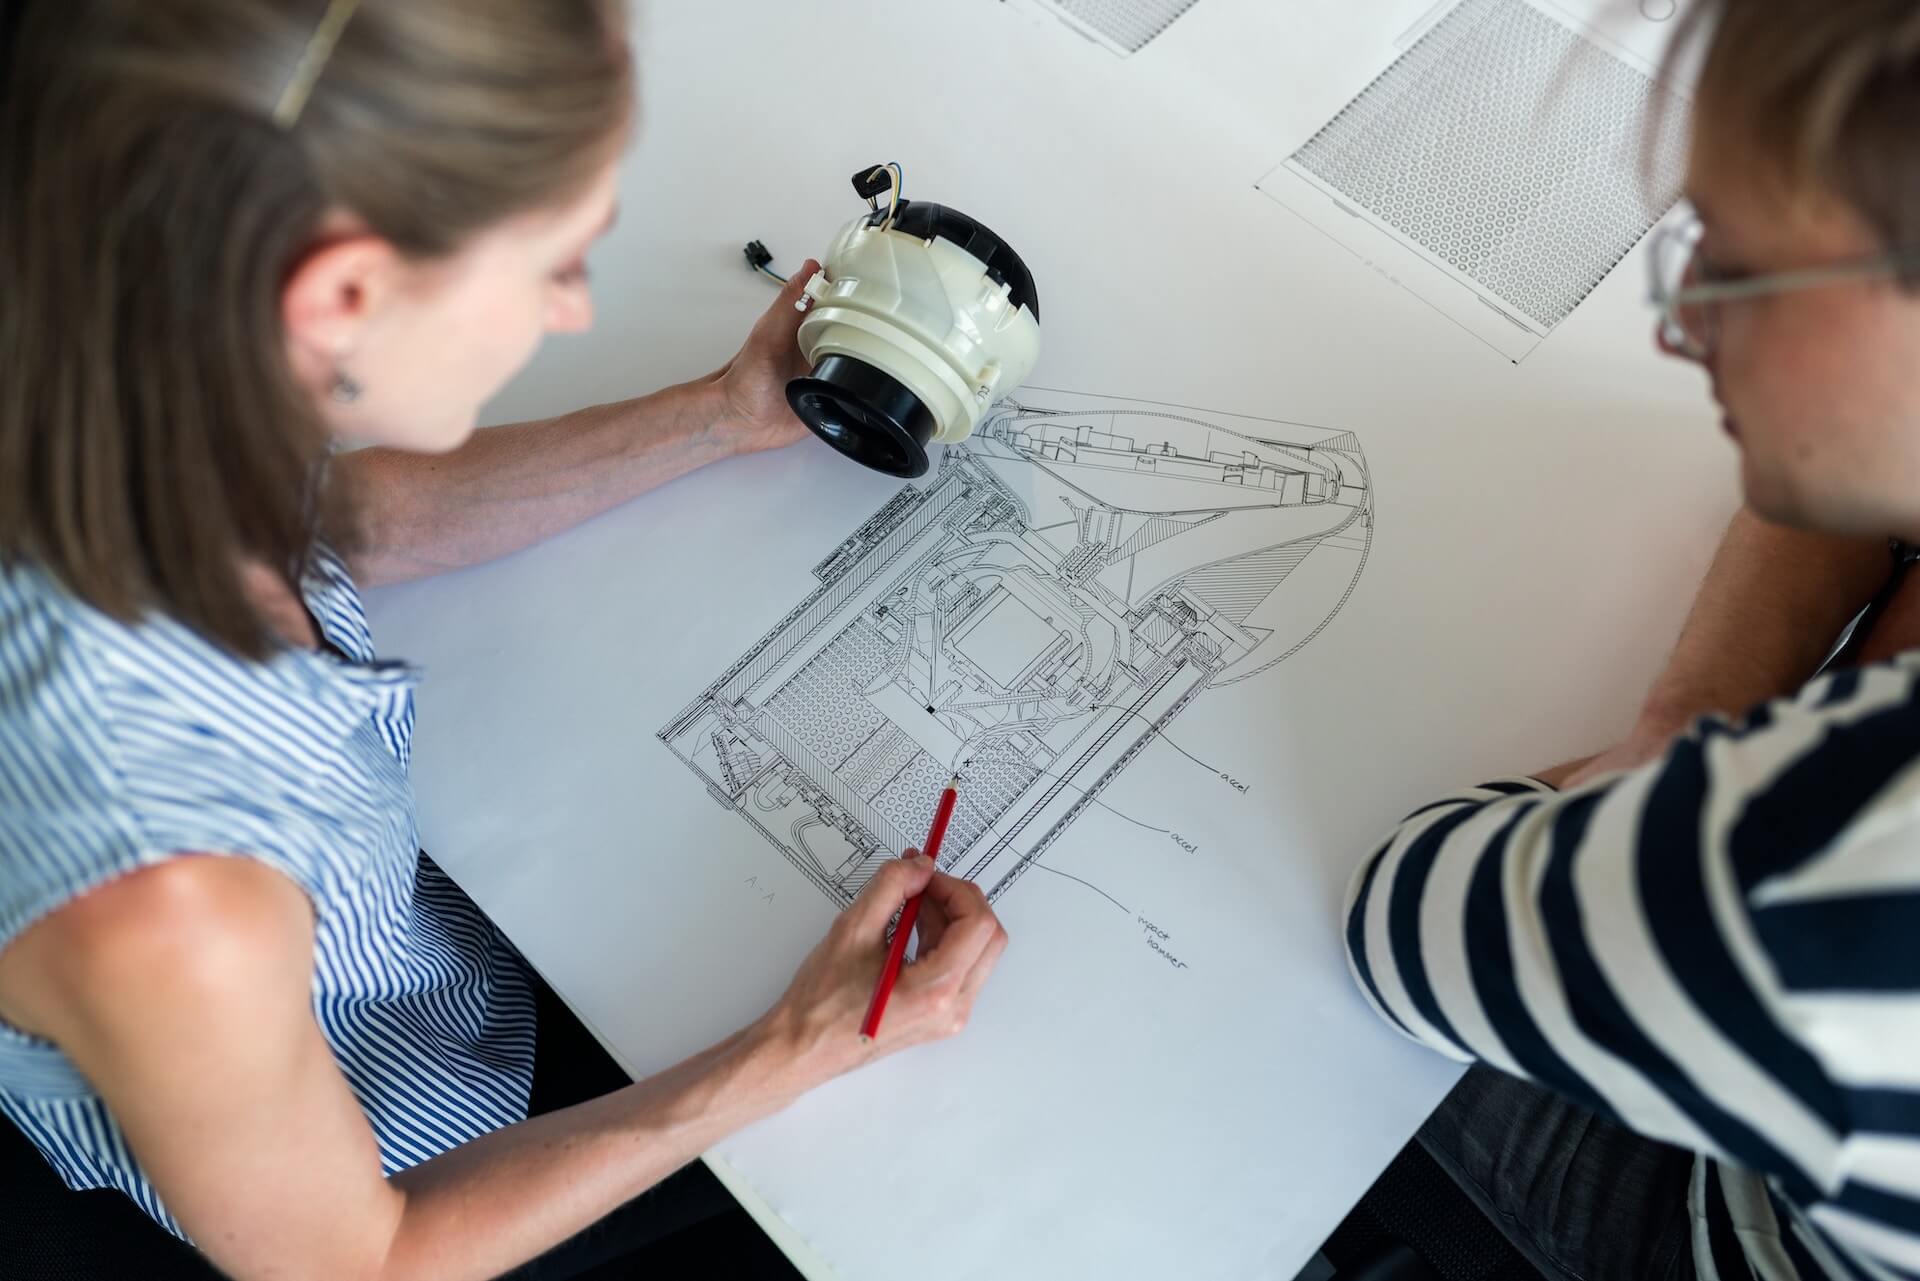 Two women who work in aerospace drawing a sketch